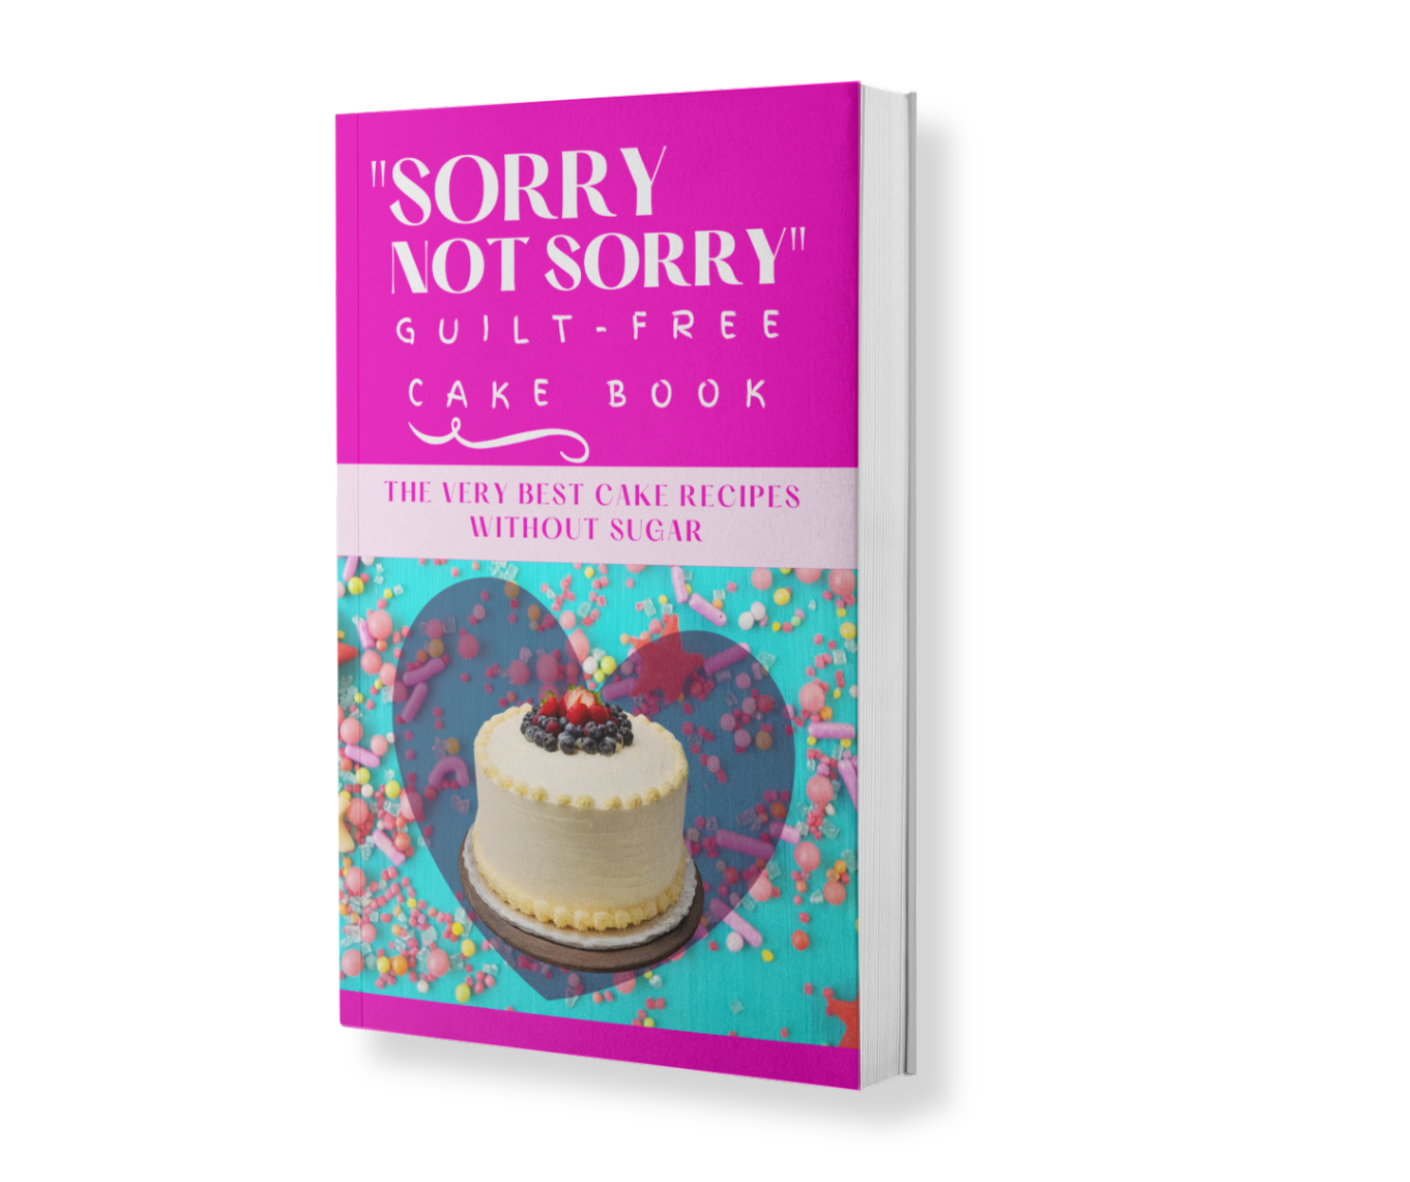 Don't regret dessert, indulge in guilt-free cake delights! "Sorry Not Sorry Recipe E-Book"